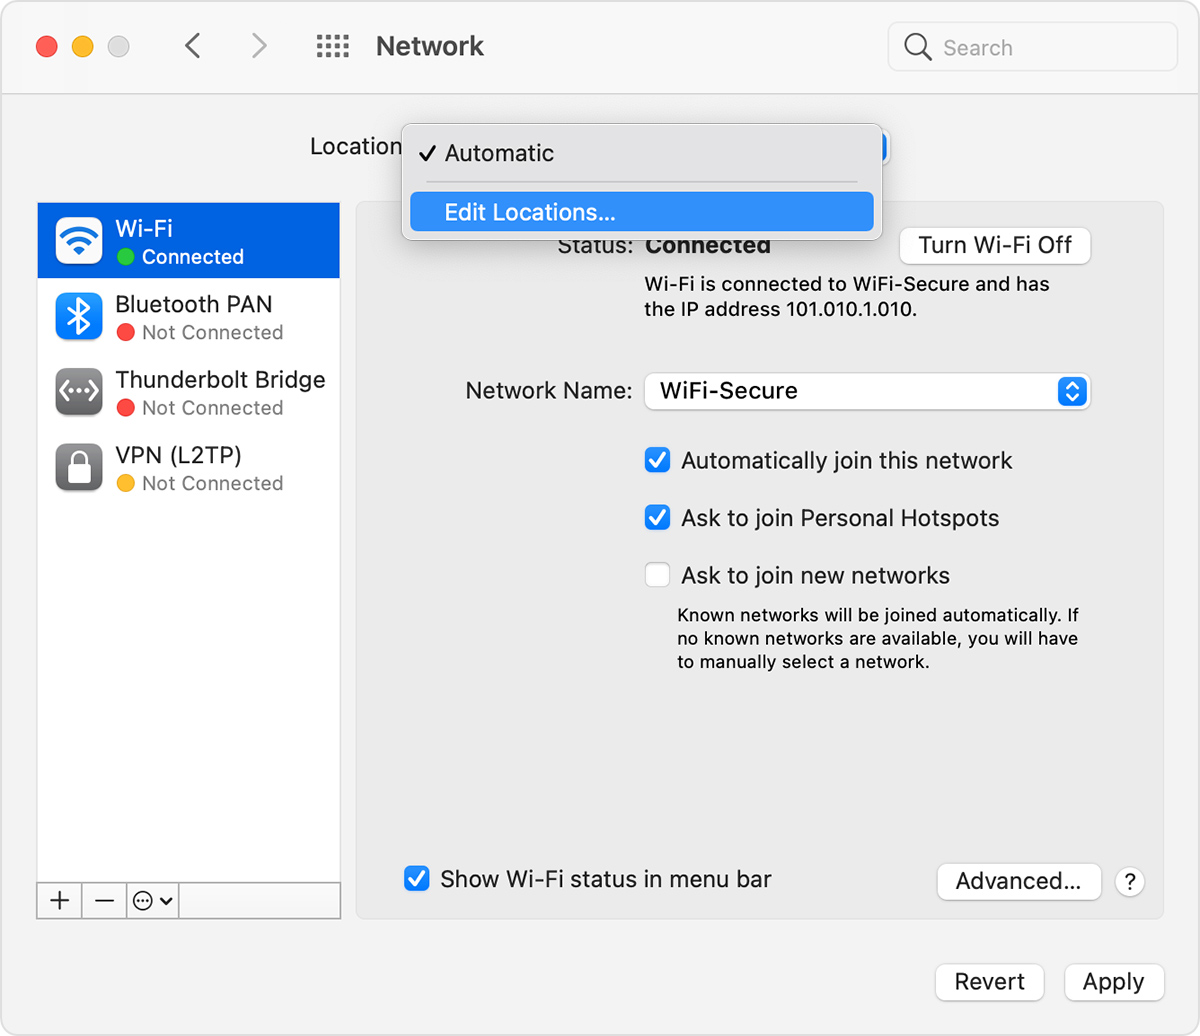 Network preferences, showing the Locations pop-up menu